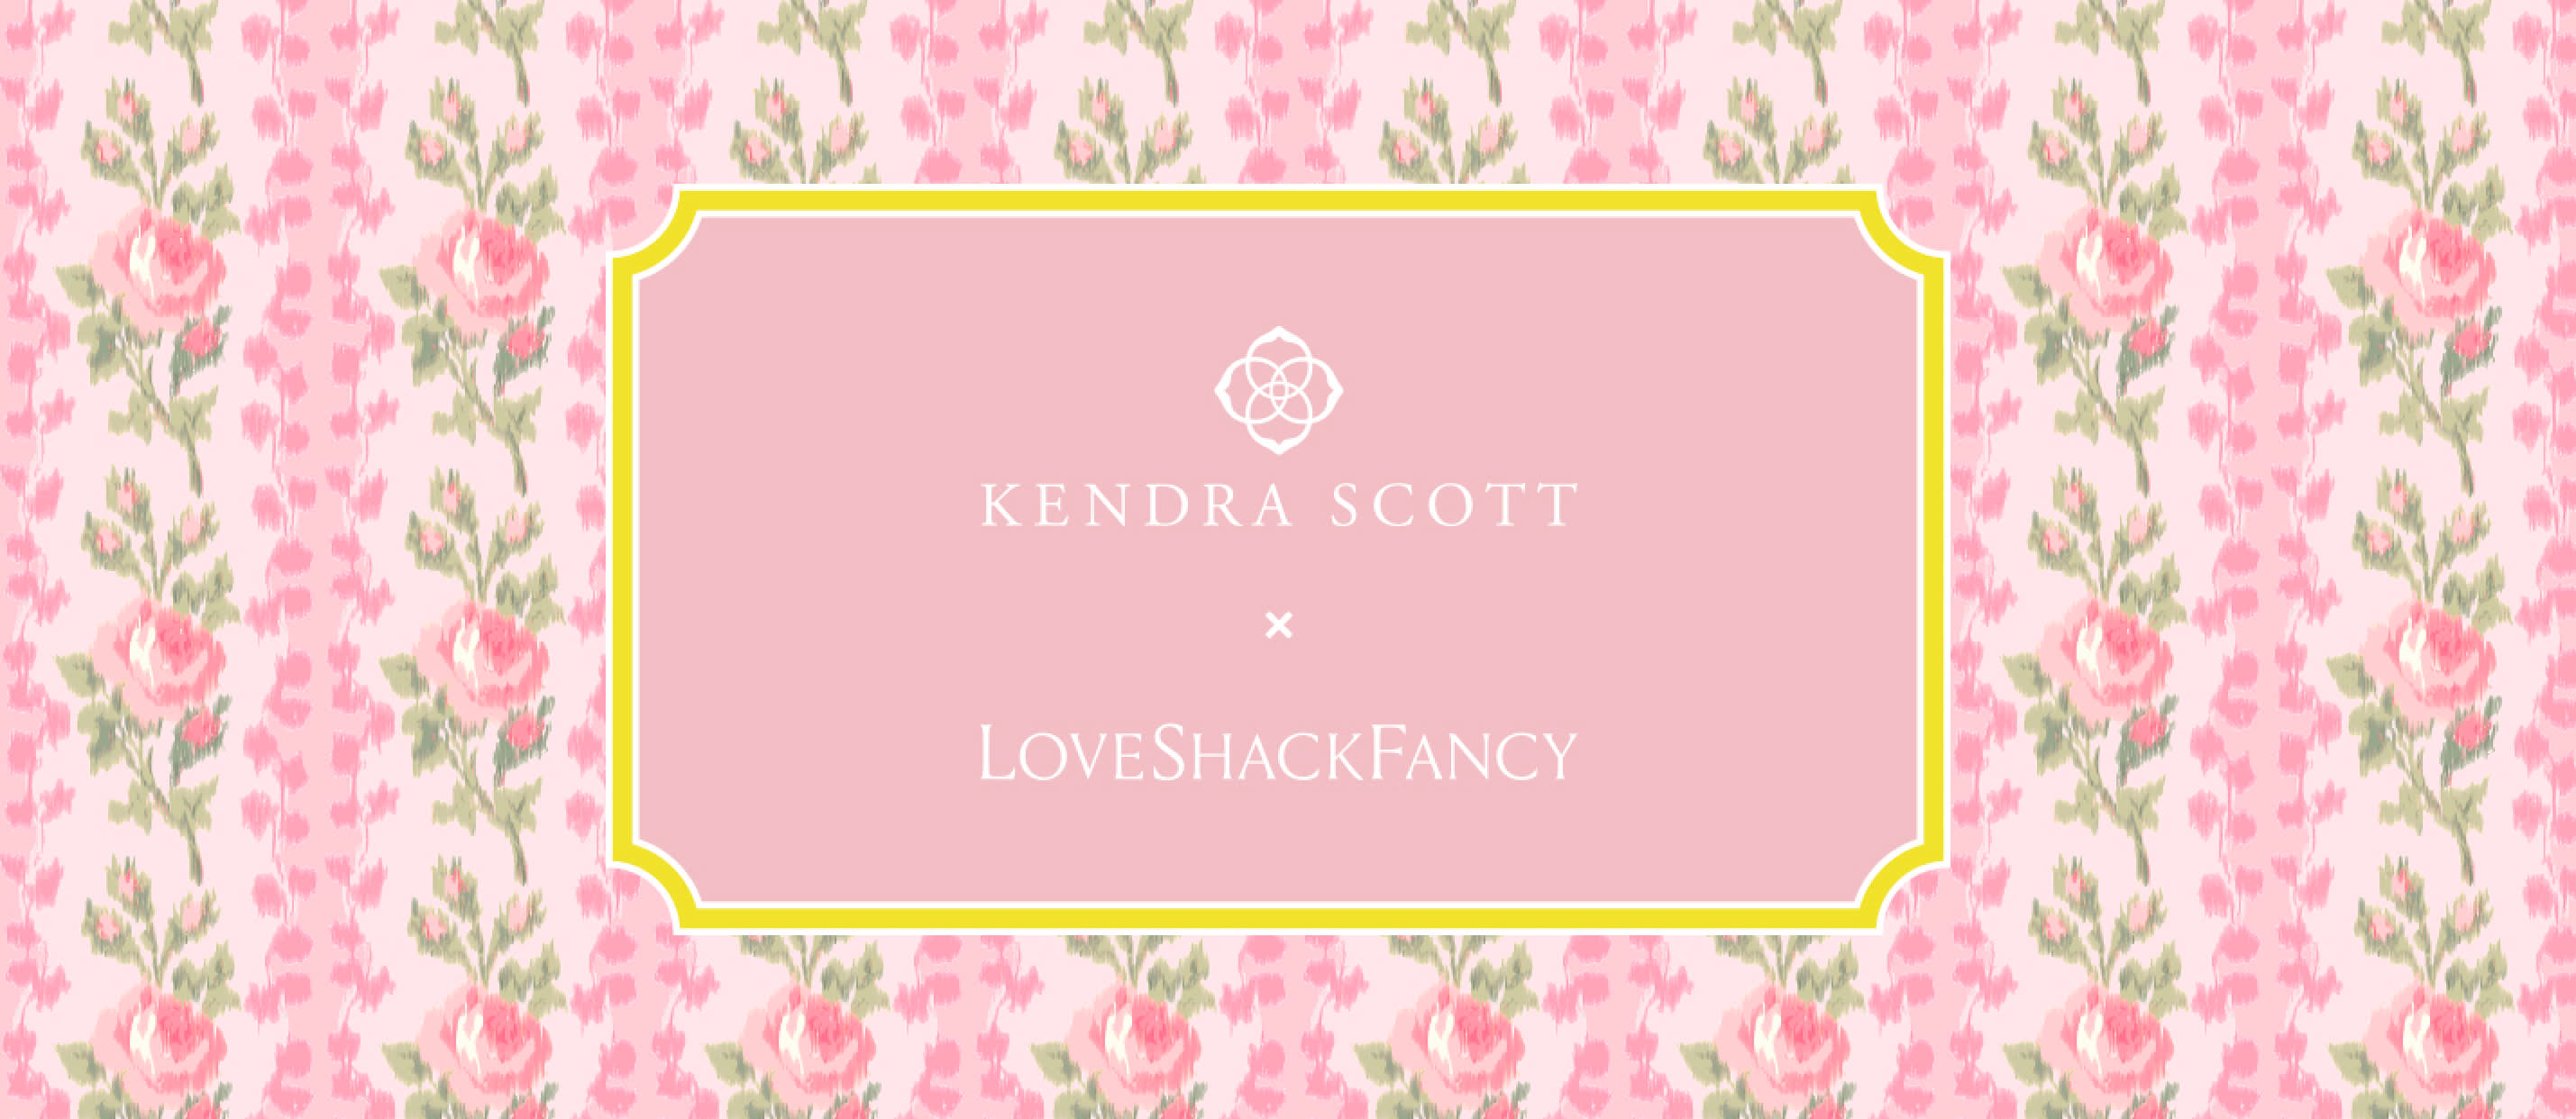 Kendra Scott x LoveShackFancy launches April 17 at 9:00 a.m. CST— be the first to shop the coll... | Kendra Scott